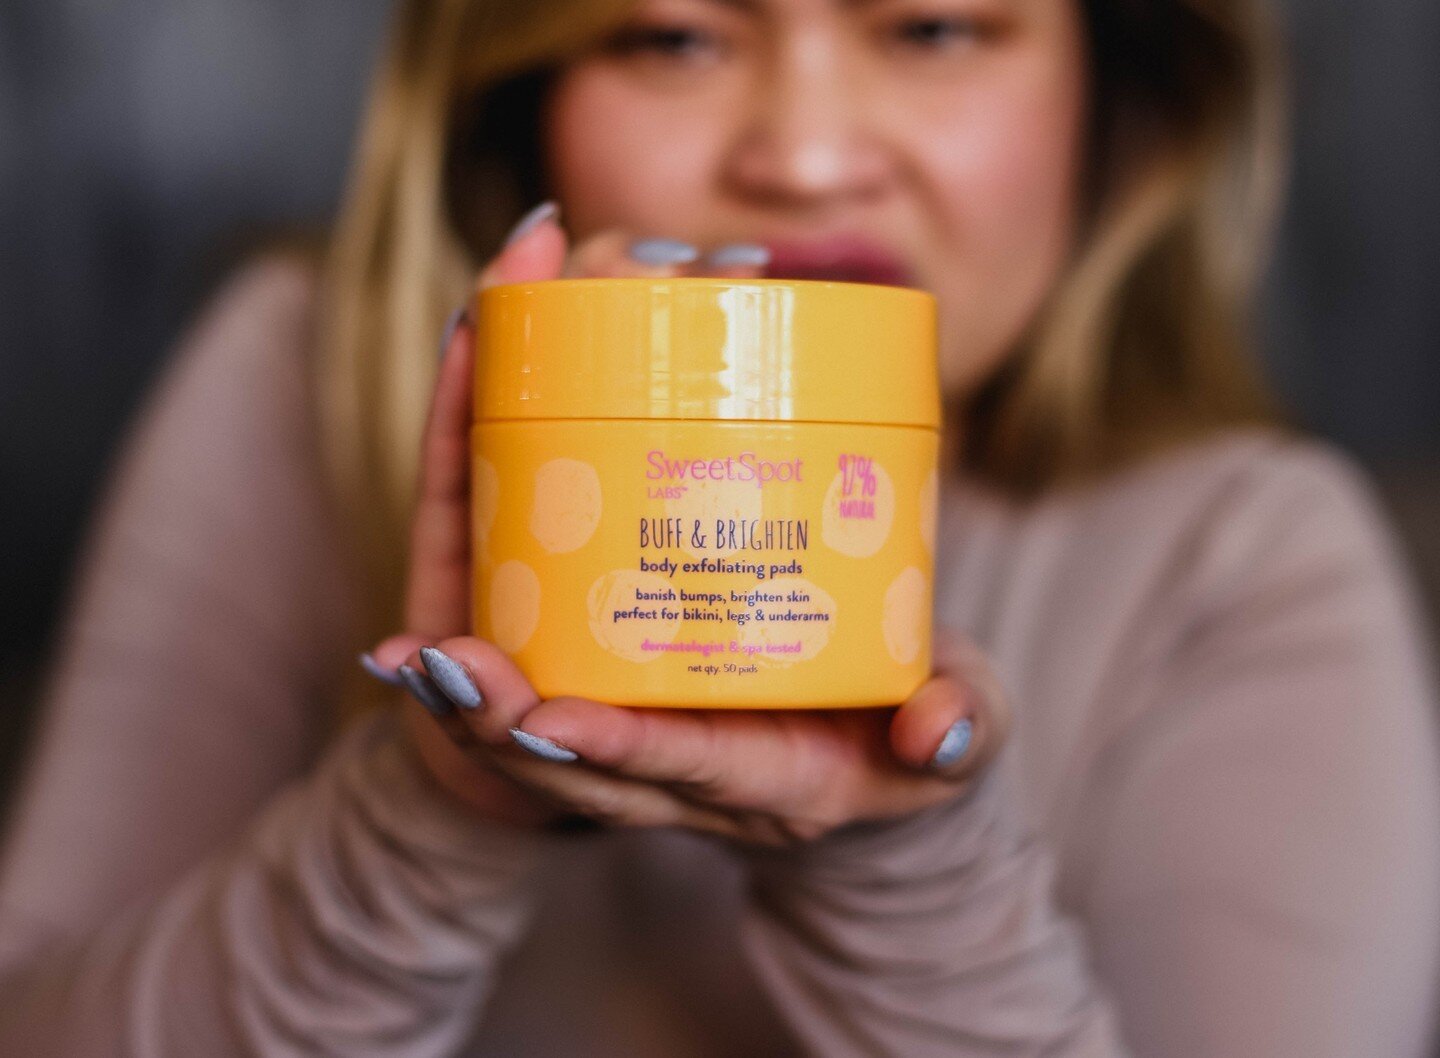 🍯 Buff &amp; Brighten AHA/BHA Body Exfoliating Pads put an end to the irritating side effects of hair removal. ⁠
⁠
Banish ingrown hair &amp; razor bumps, soothe razor burn &amp; brighten hyperpigmentation with this must-have for anywhere you shave, 